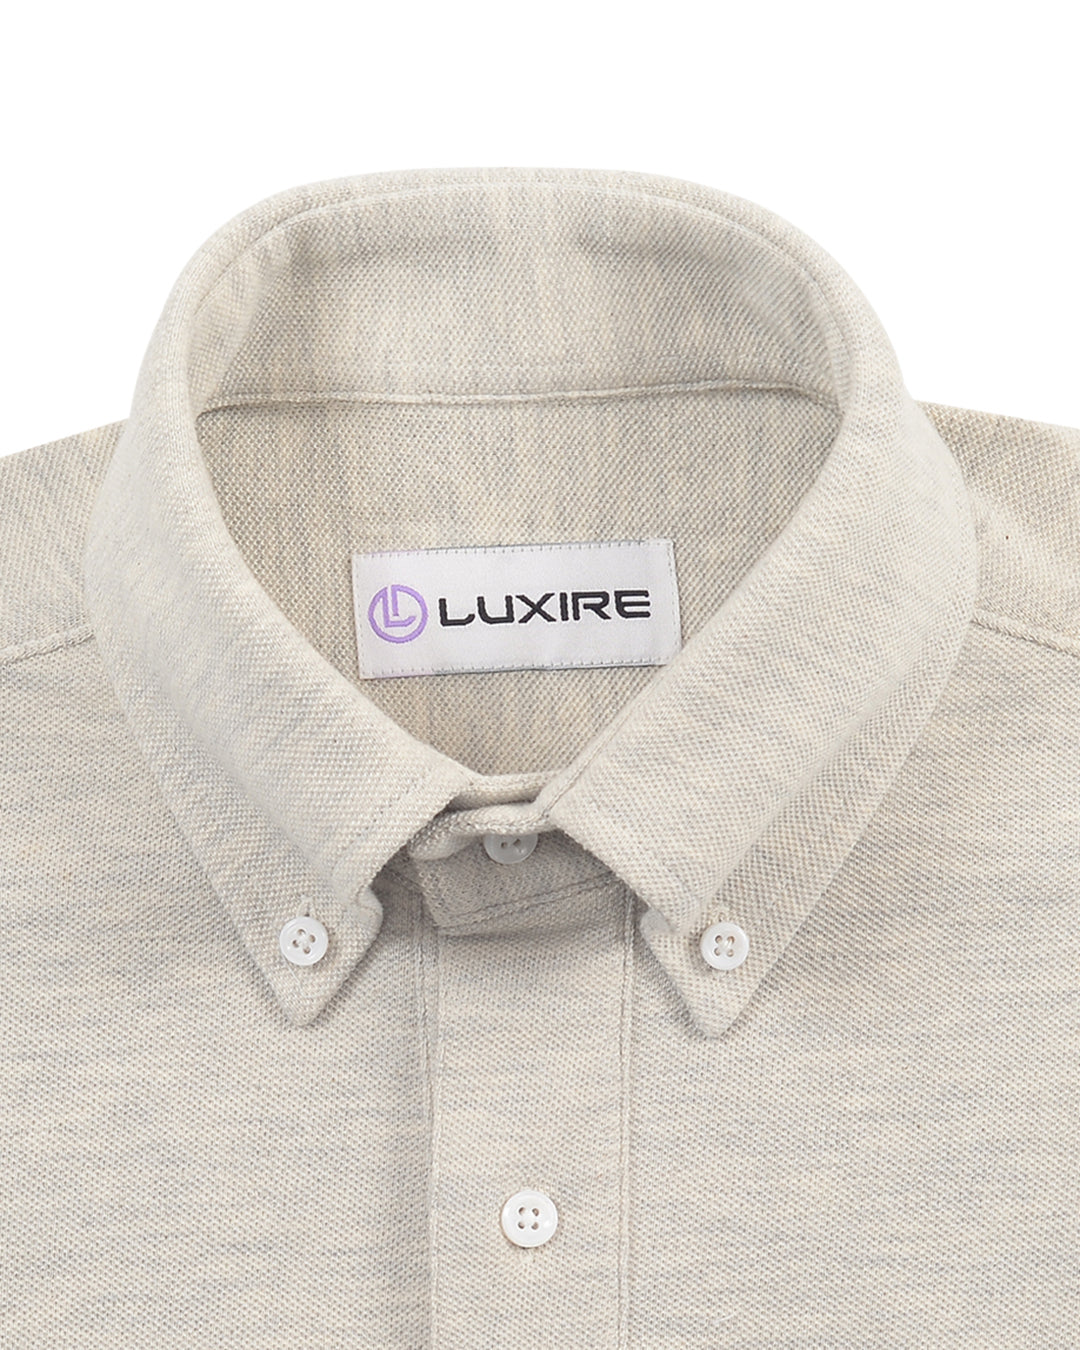 Collar of the custom oxford polo shirt for men by Luxire in cloud grey